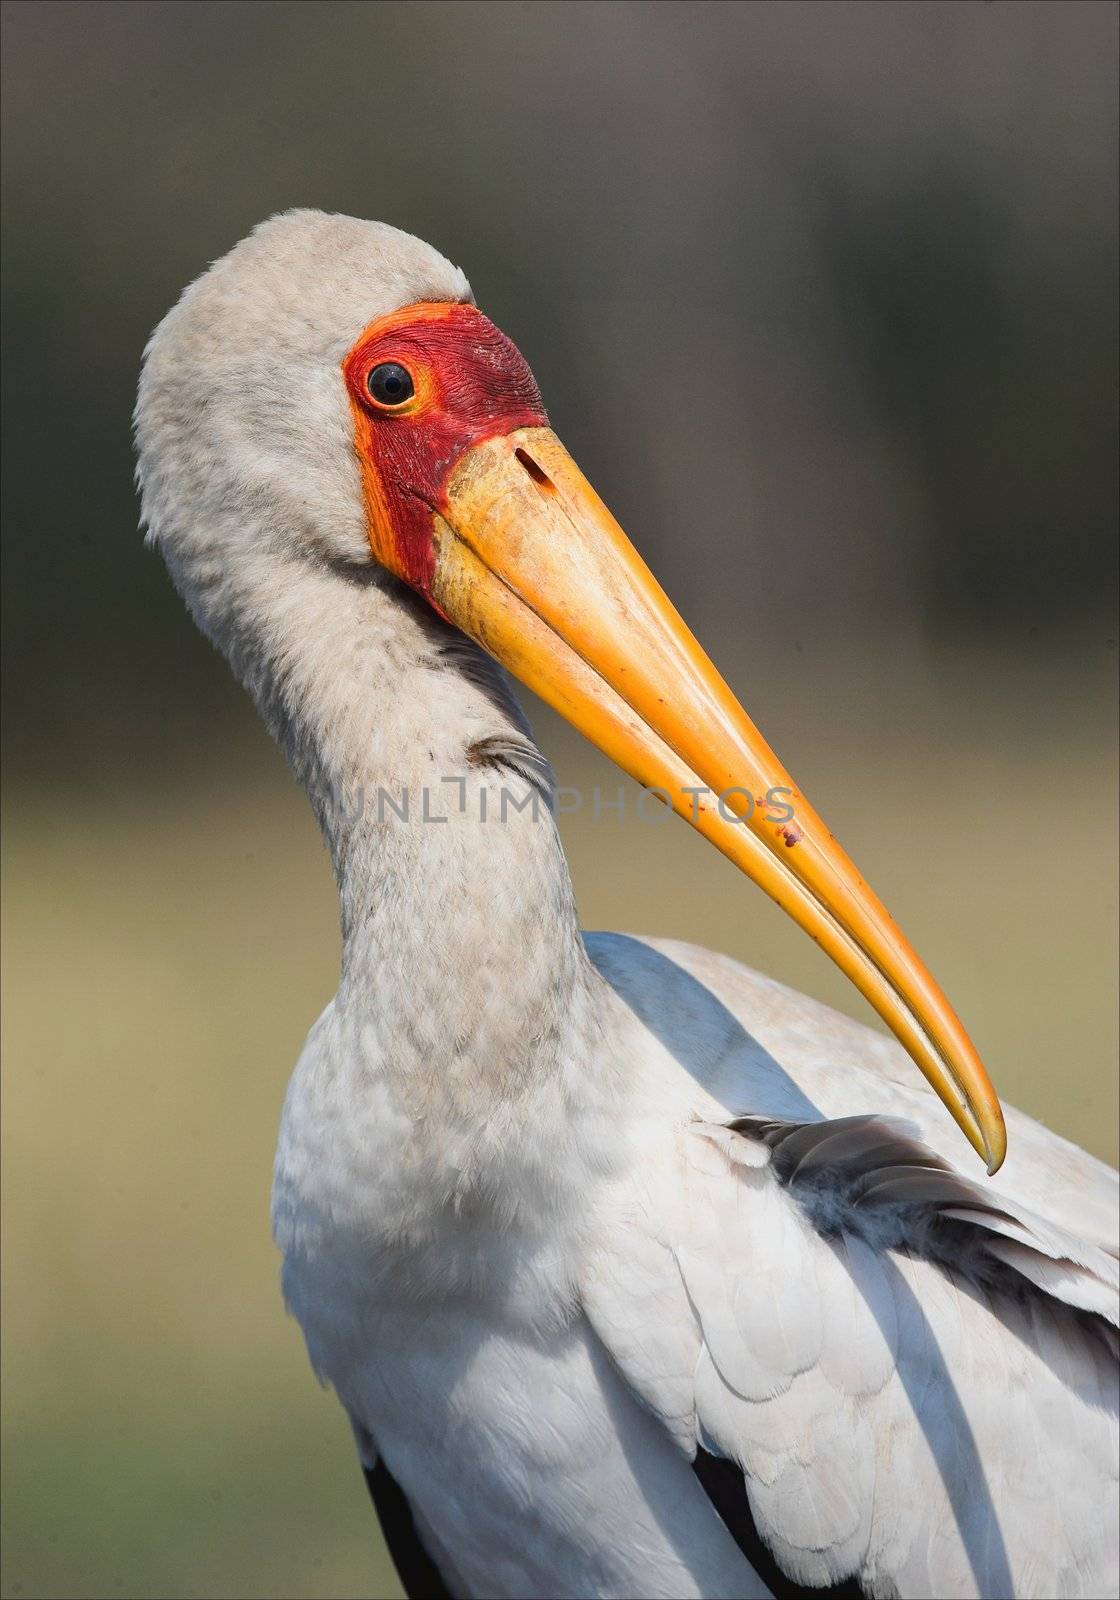 The Yellow-billed Stork, Mycteria ibis, is a large wading bird in the stork family Ciconiidae. It occurs Africa South of Sahara and in Madagascar. Plumage mainly pinkish-white with black wings and tail; bill yellow, blunt, and decurved at tip. Immature birds are greyish brown with dull greyish brown bill, dull orange face and brownish legs